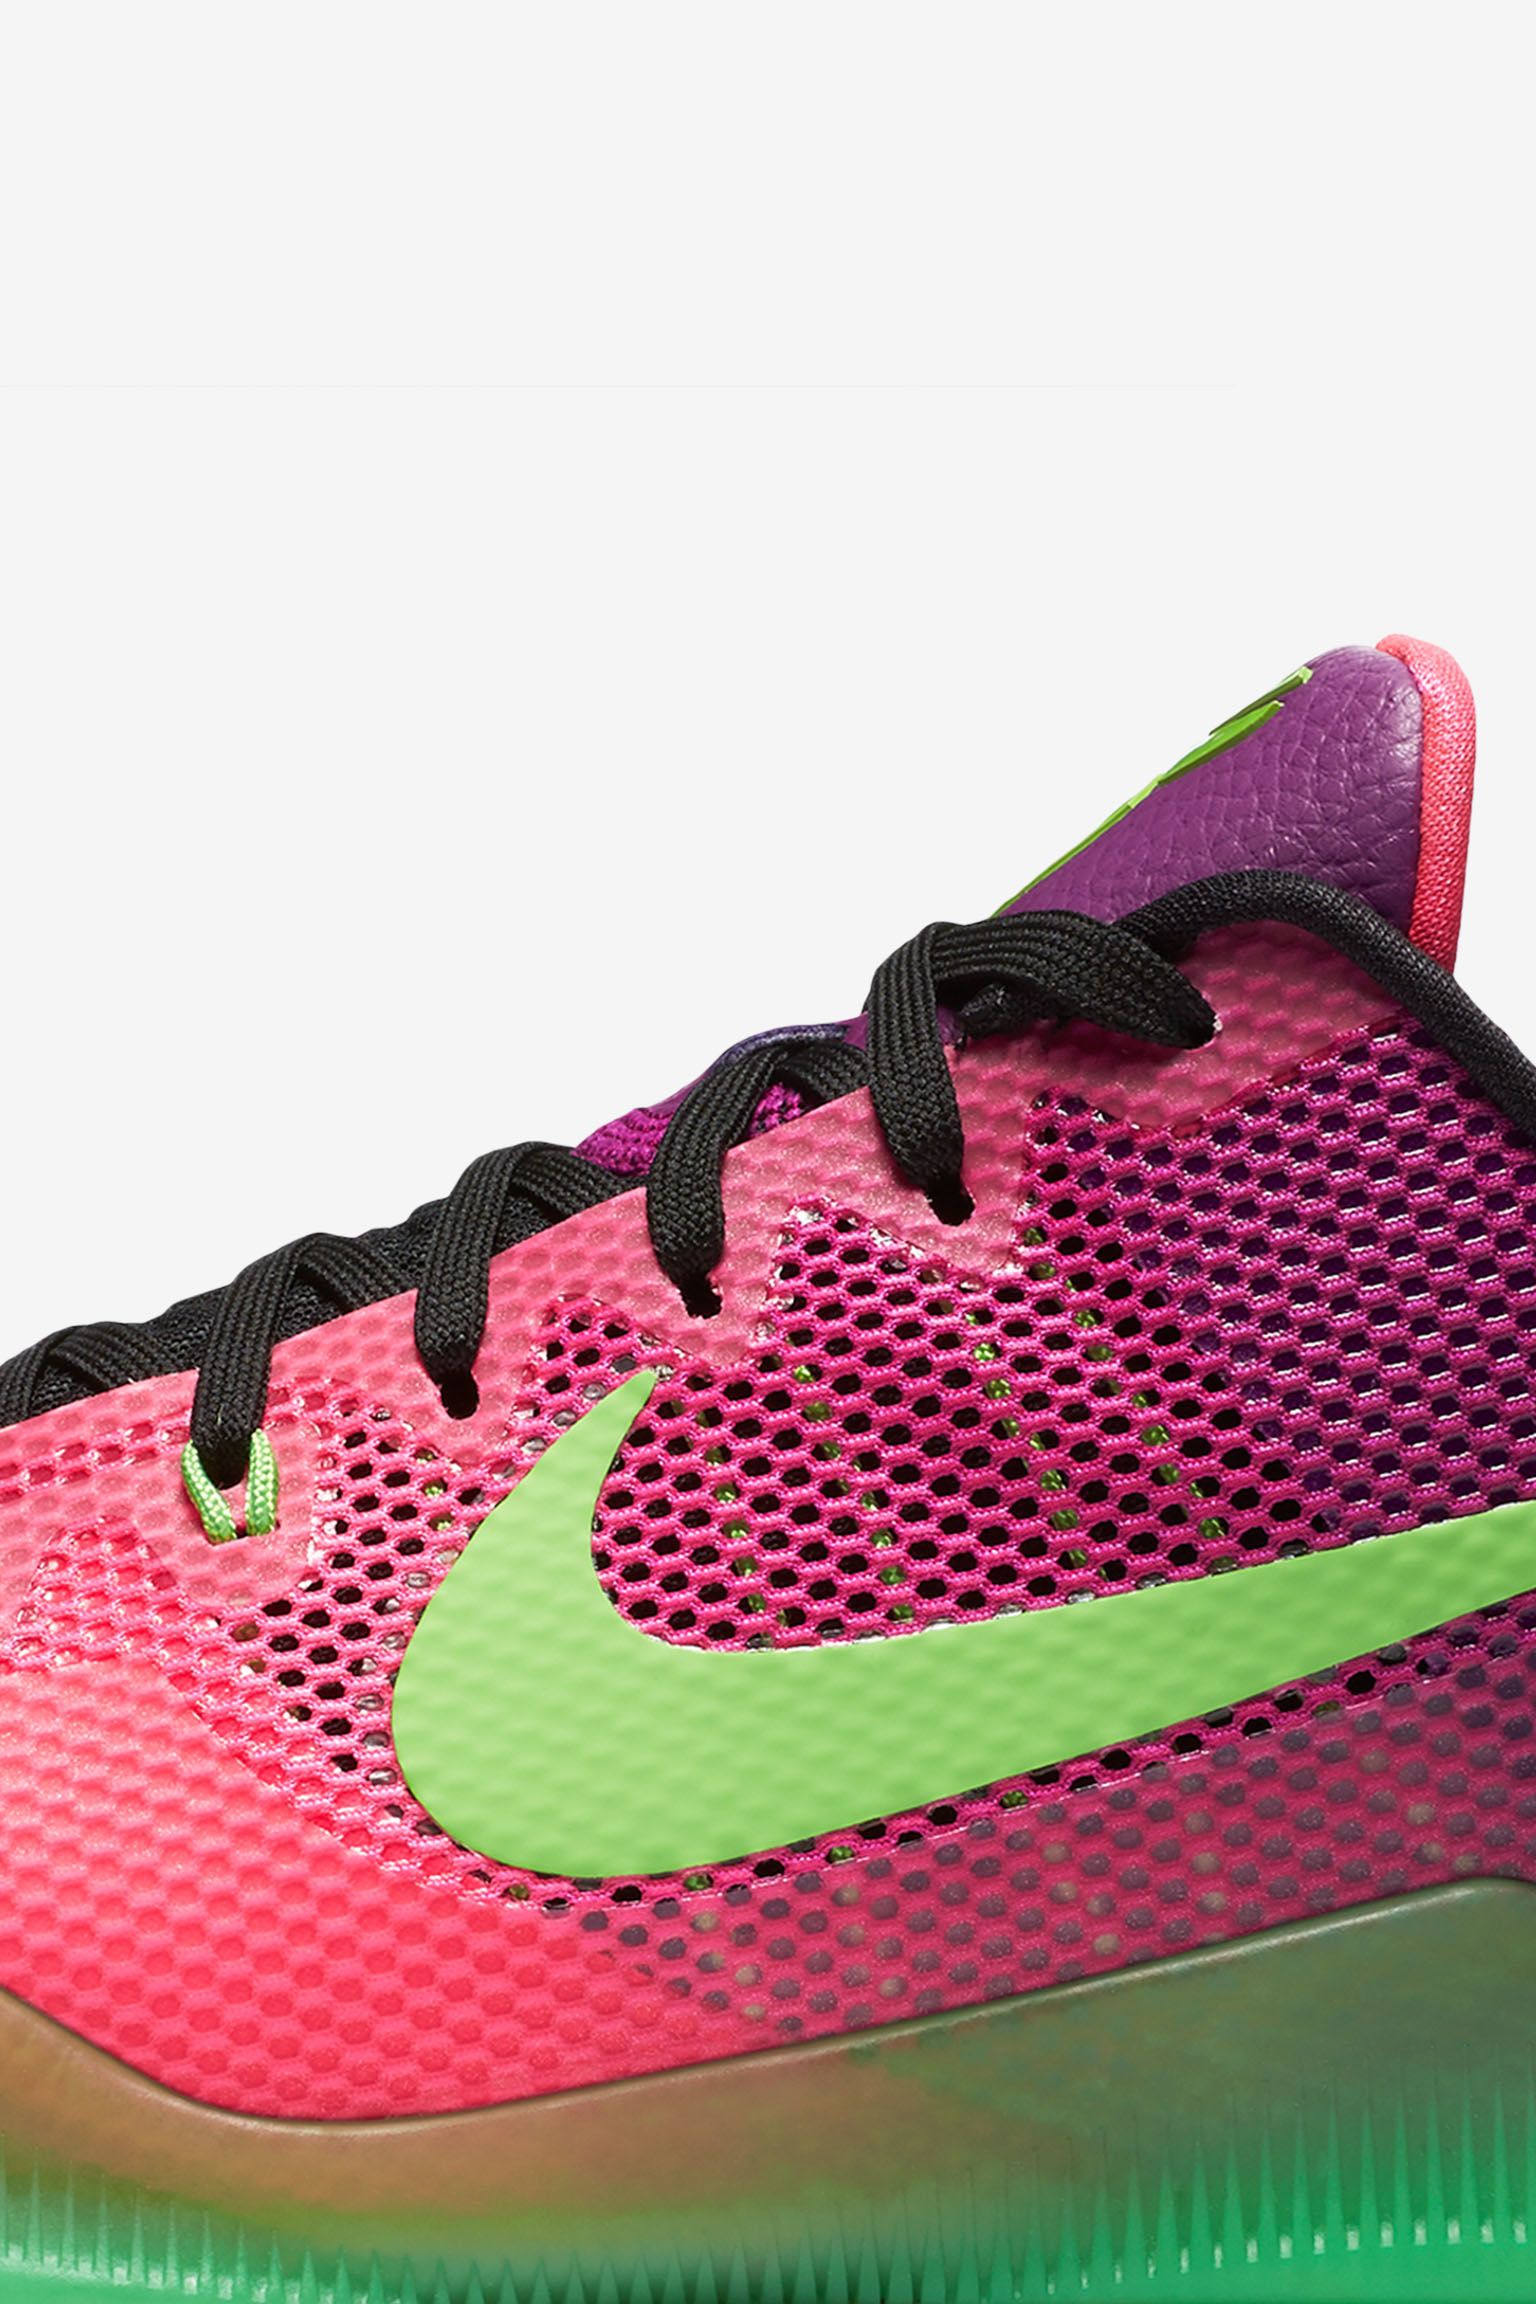 Nike Kobe 11 Mambacurial 'Pink Flash & Action Green' Release Date 